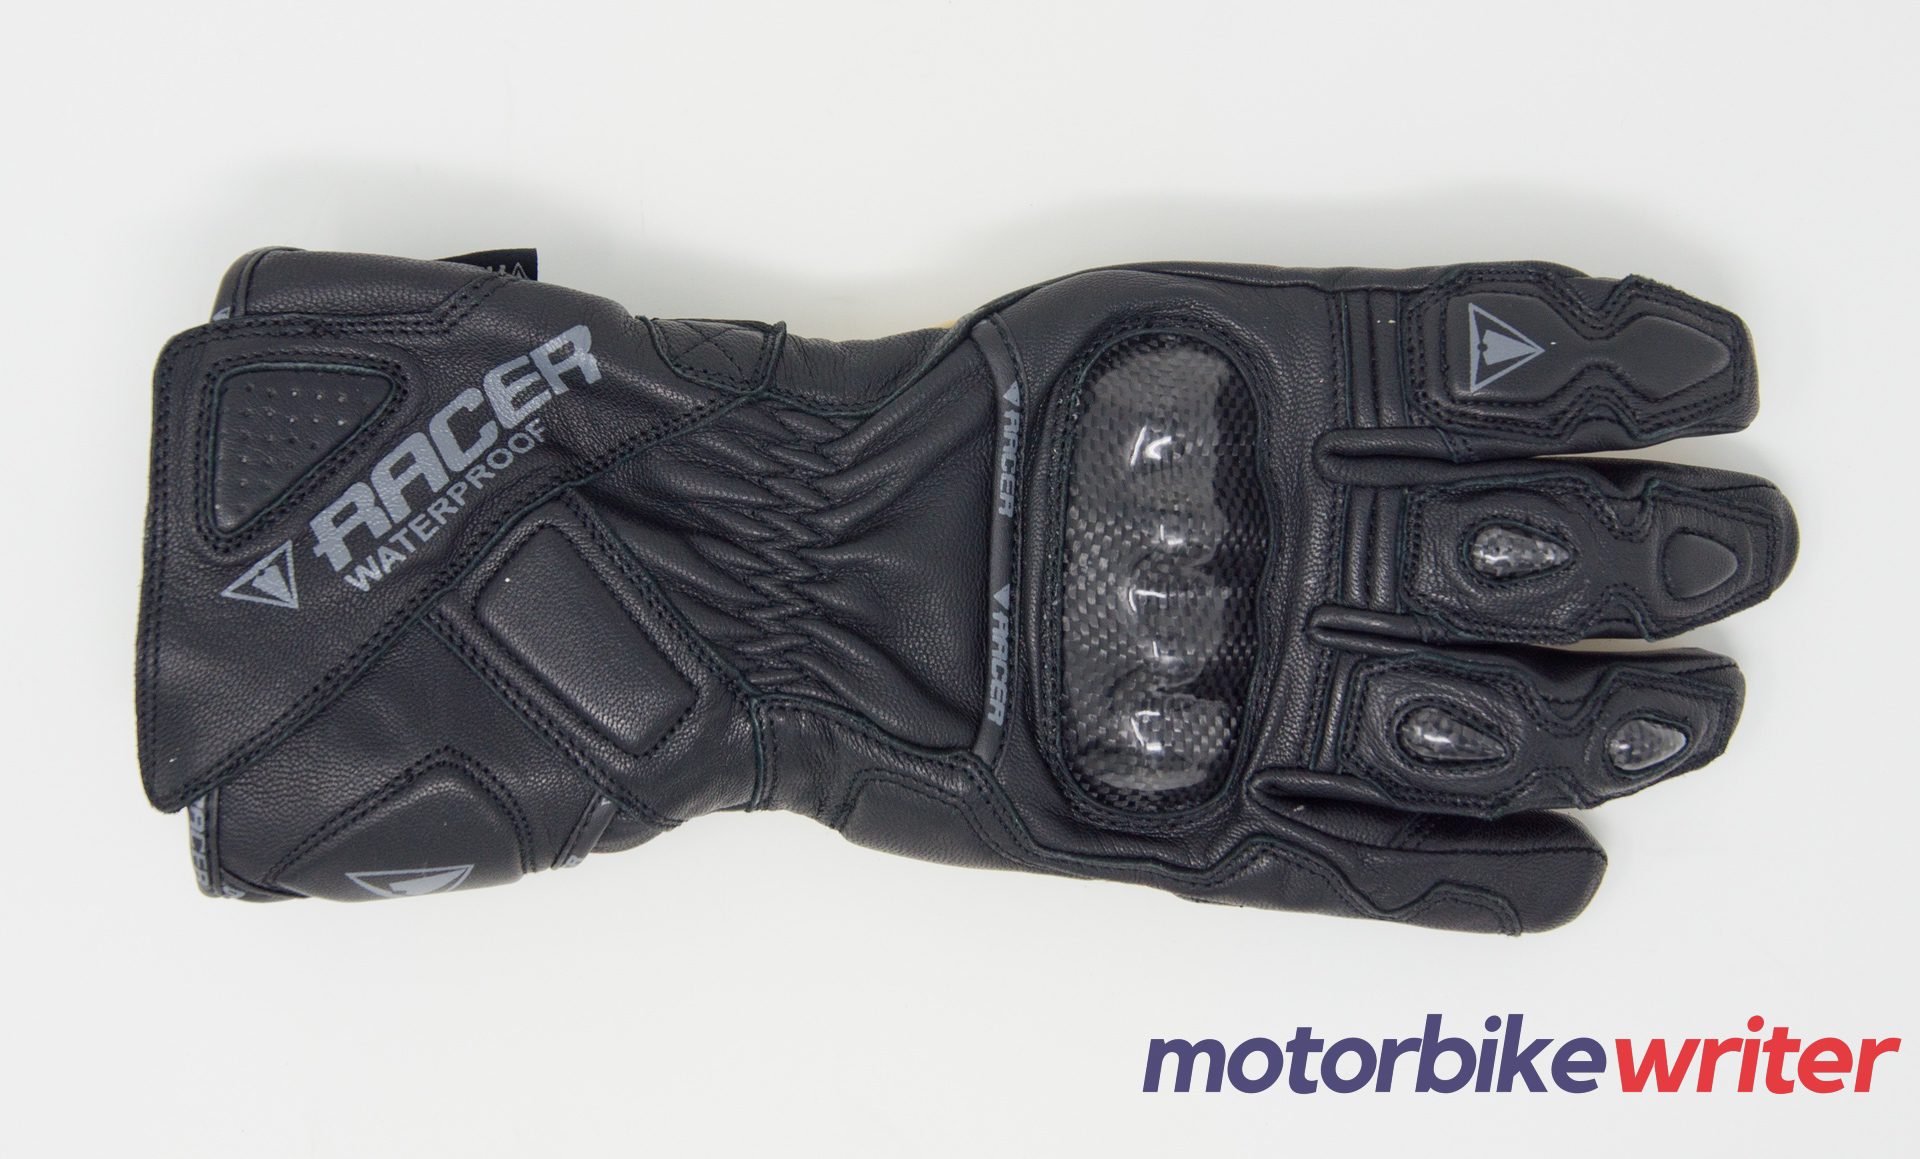 Back of Racer Multitop 2 Waterproof Gloves on white background